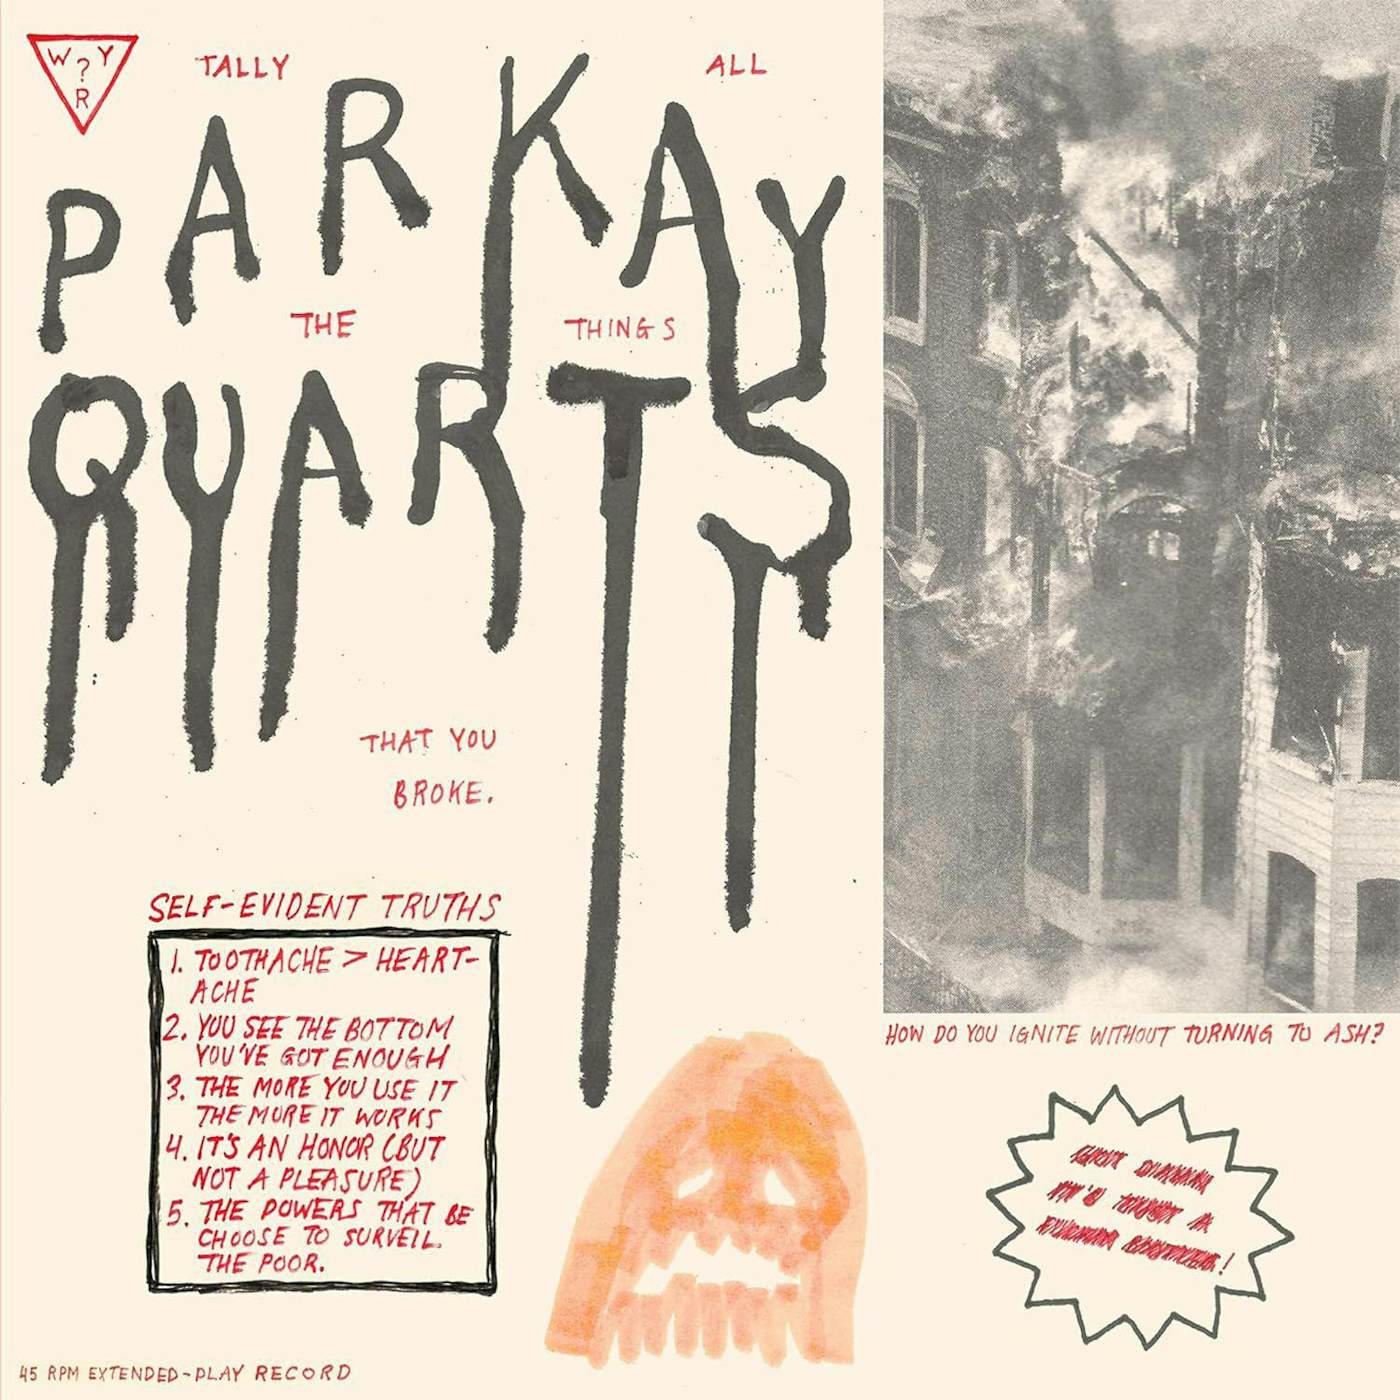 Parquet Courts LP - Tally All the Things That You Broke (Vinyl)